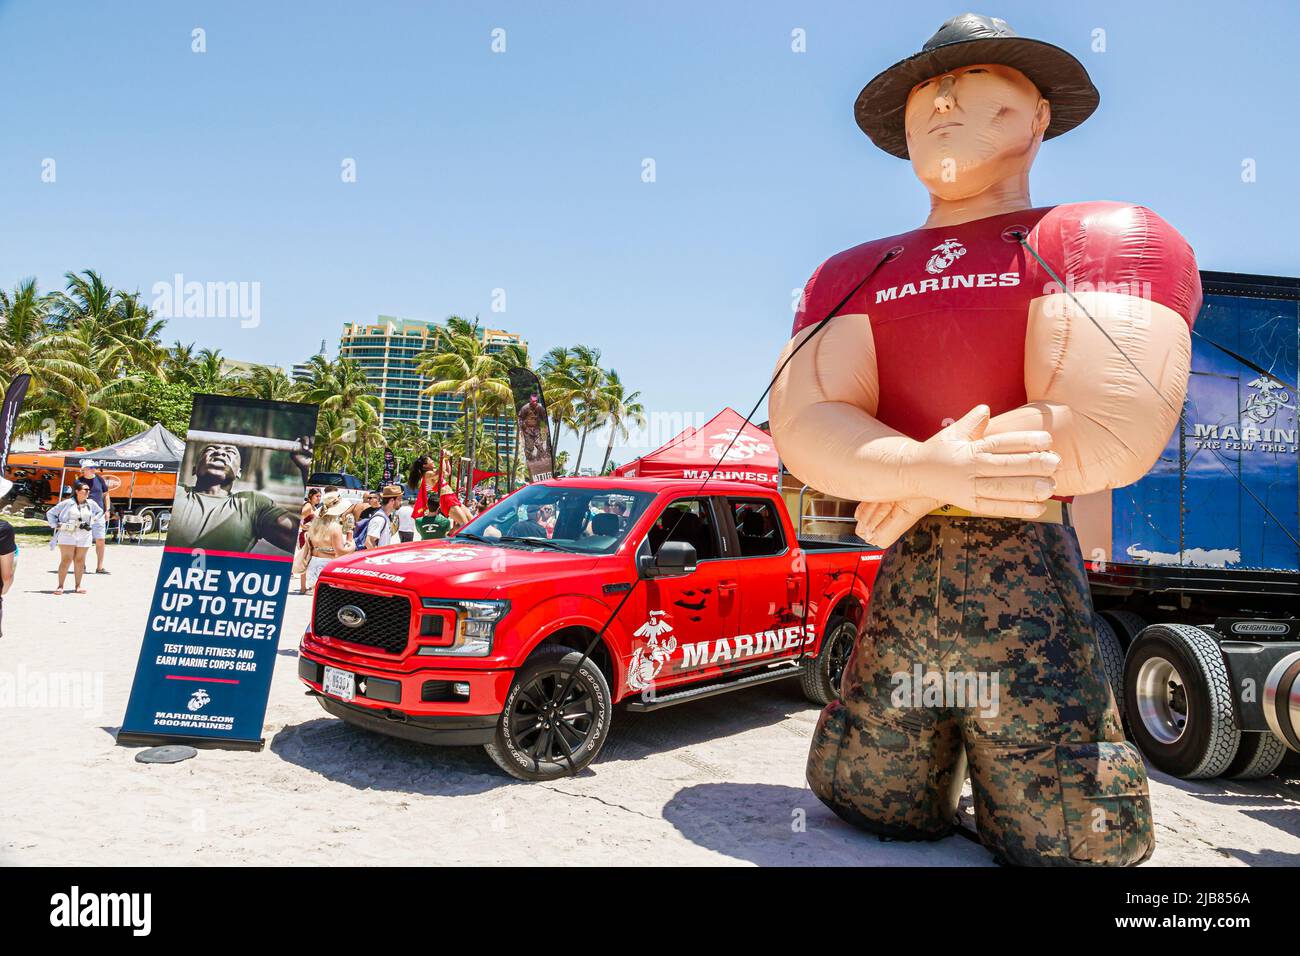 Miami Beach Florida,Hyundai Air & Sea Show Military Village vendor vendors,exhibitor exhibitors stall stalls booth booths armed forces recruiting prom Stock Photo